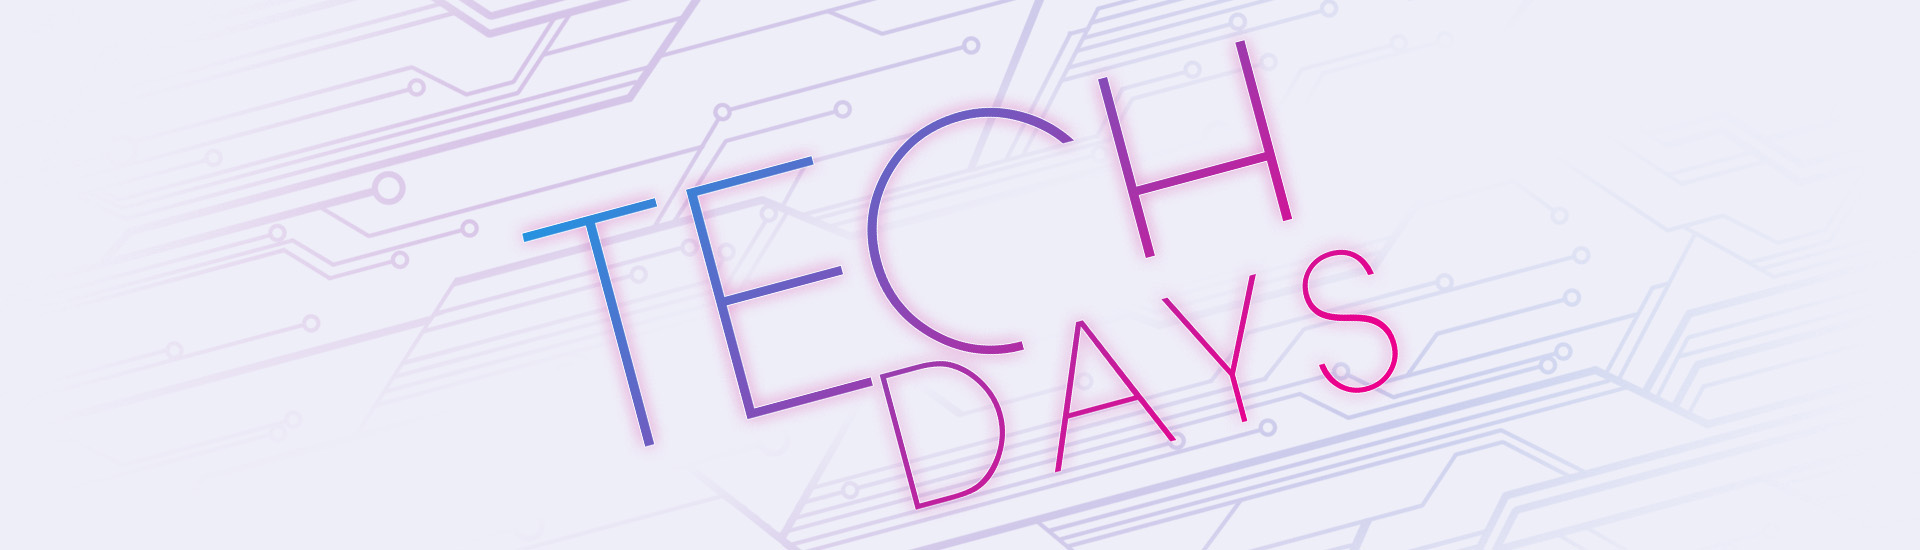 tech days 2019 graphic